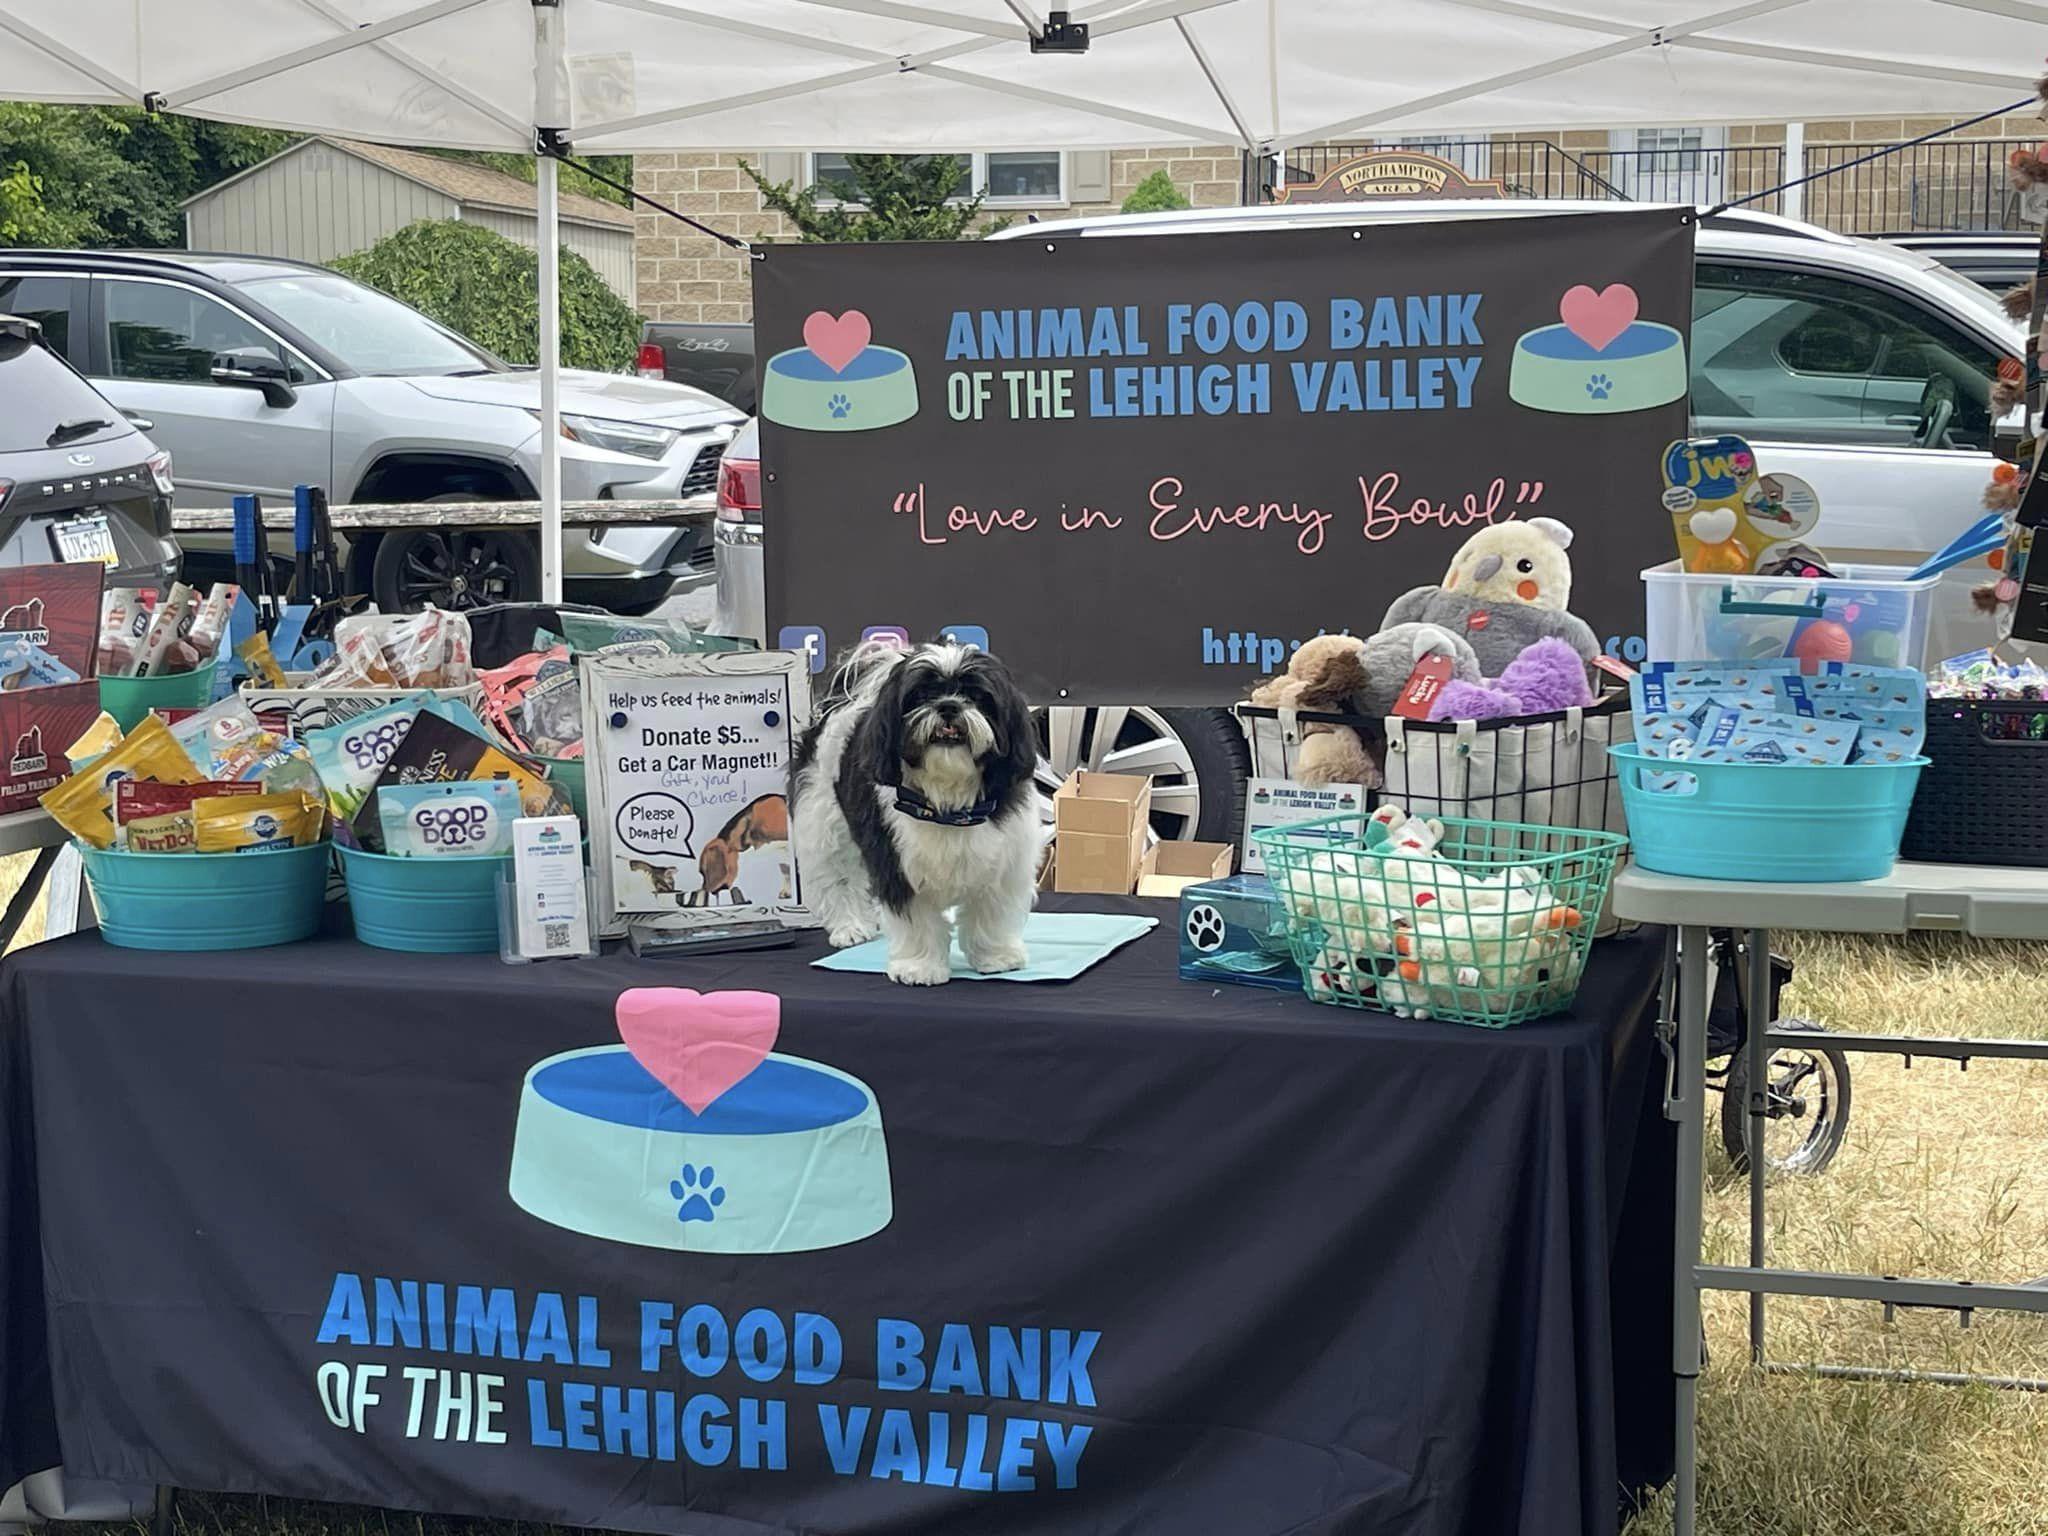 Pet Friendly Animal Food Bank of the Lehigh Valley